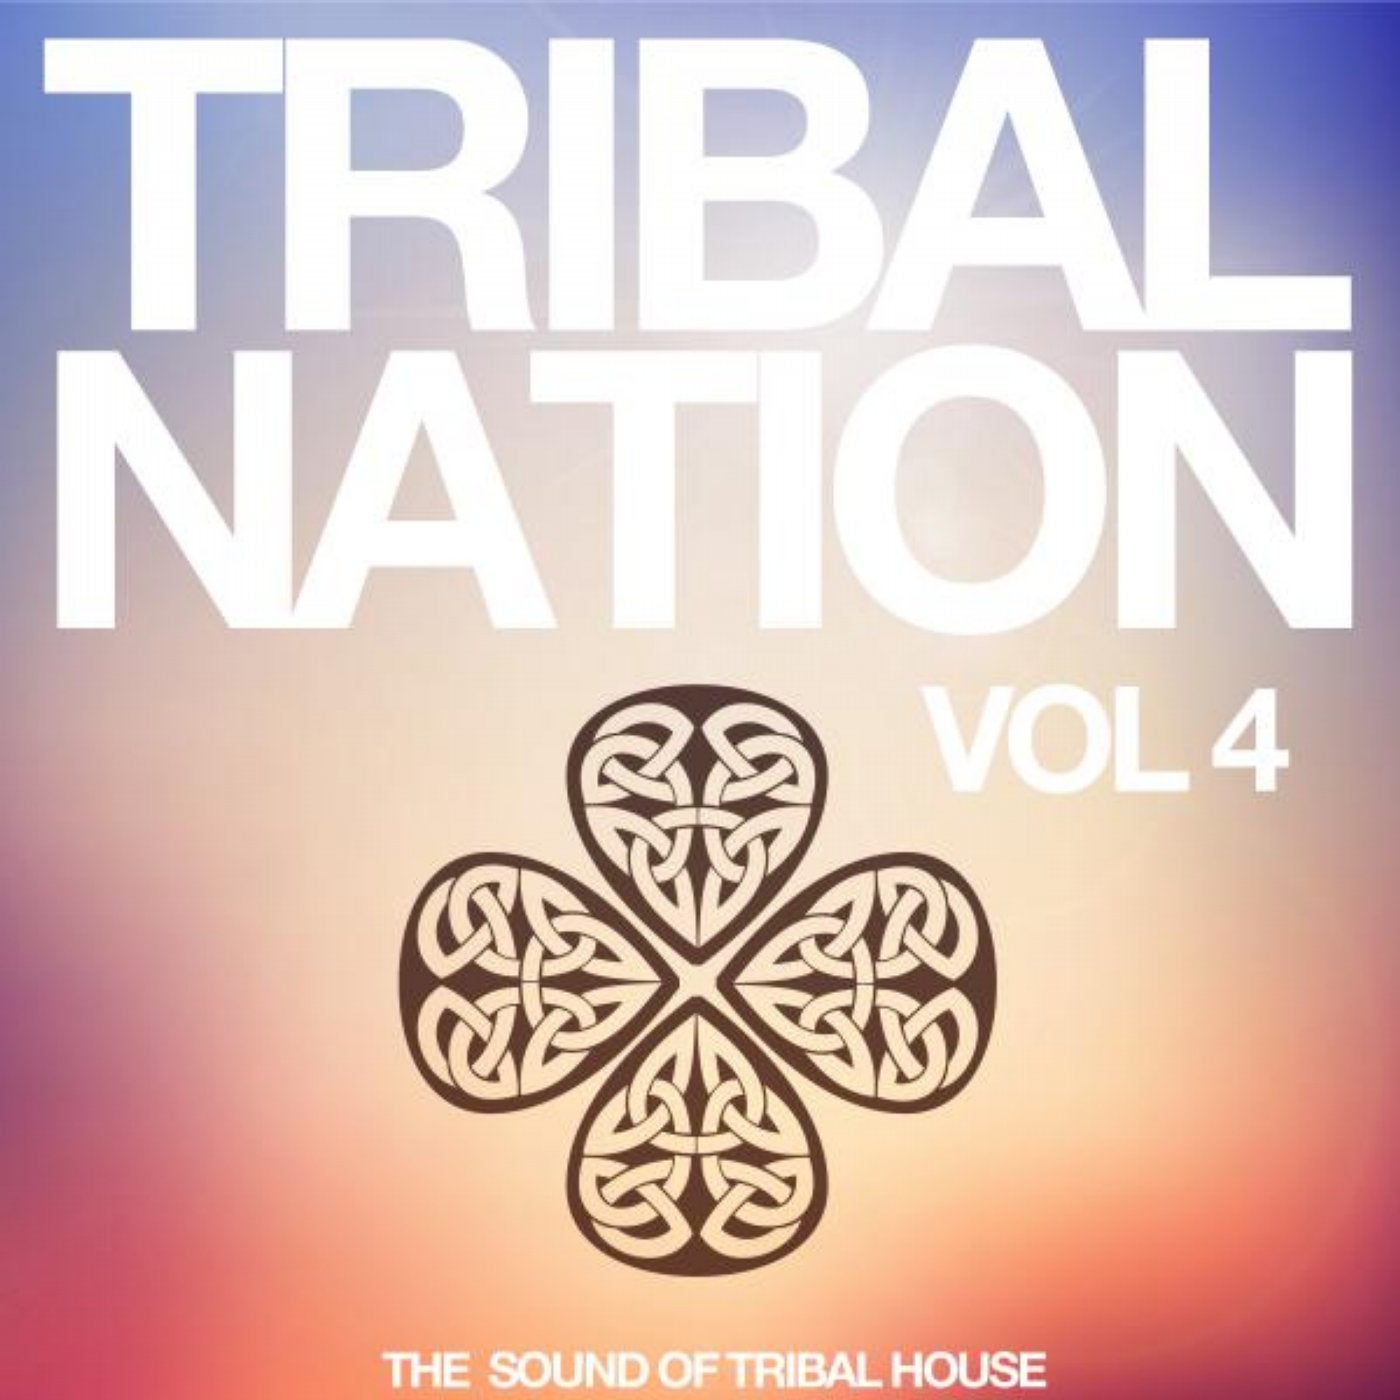 Tribal Nation, Vol. 4 (The Sound of Tribal House)